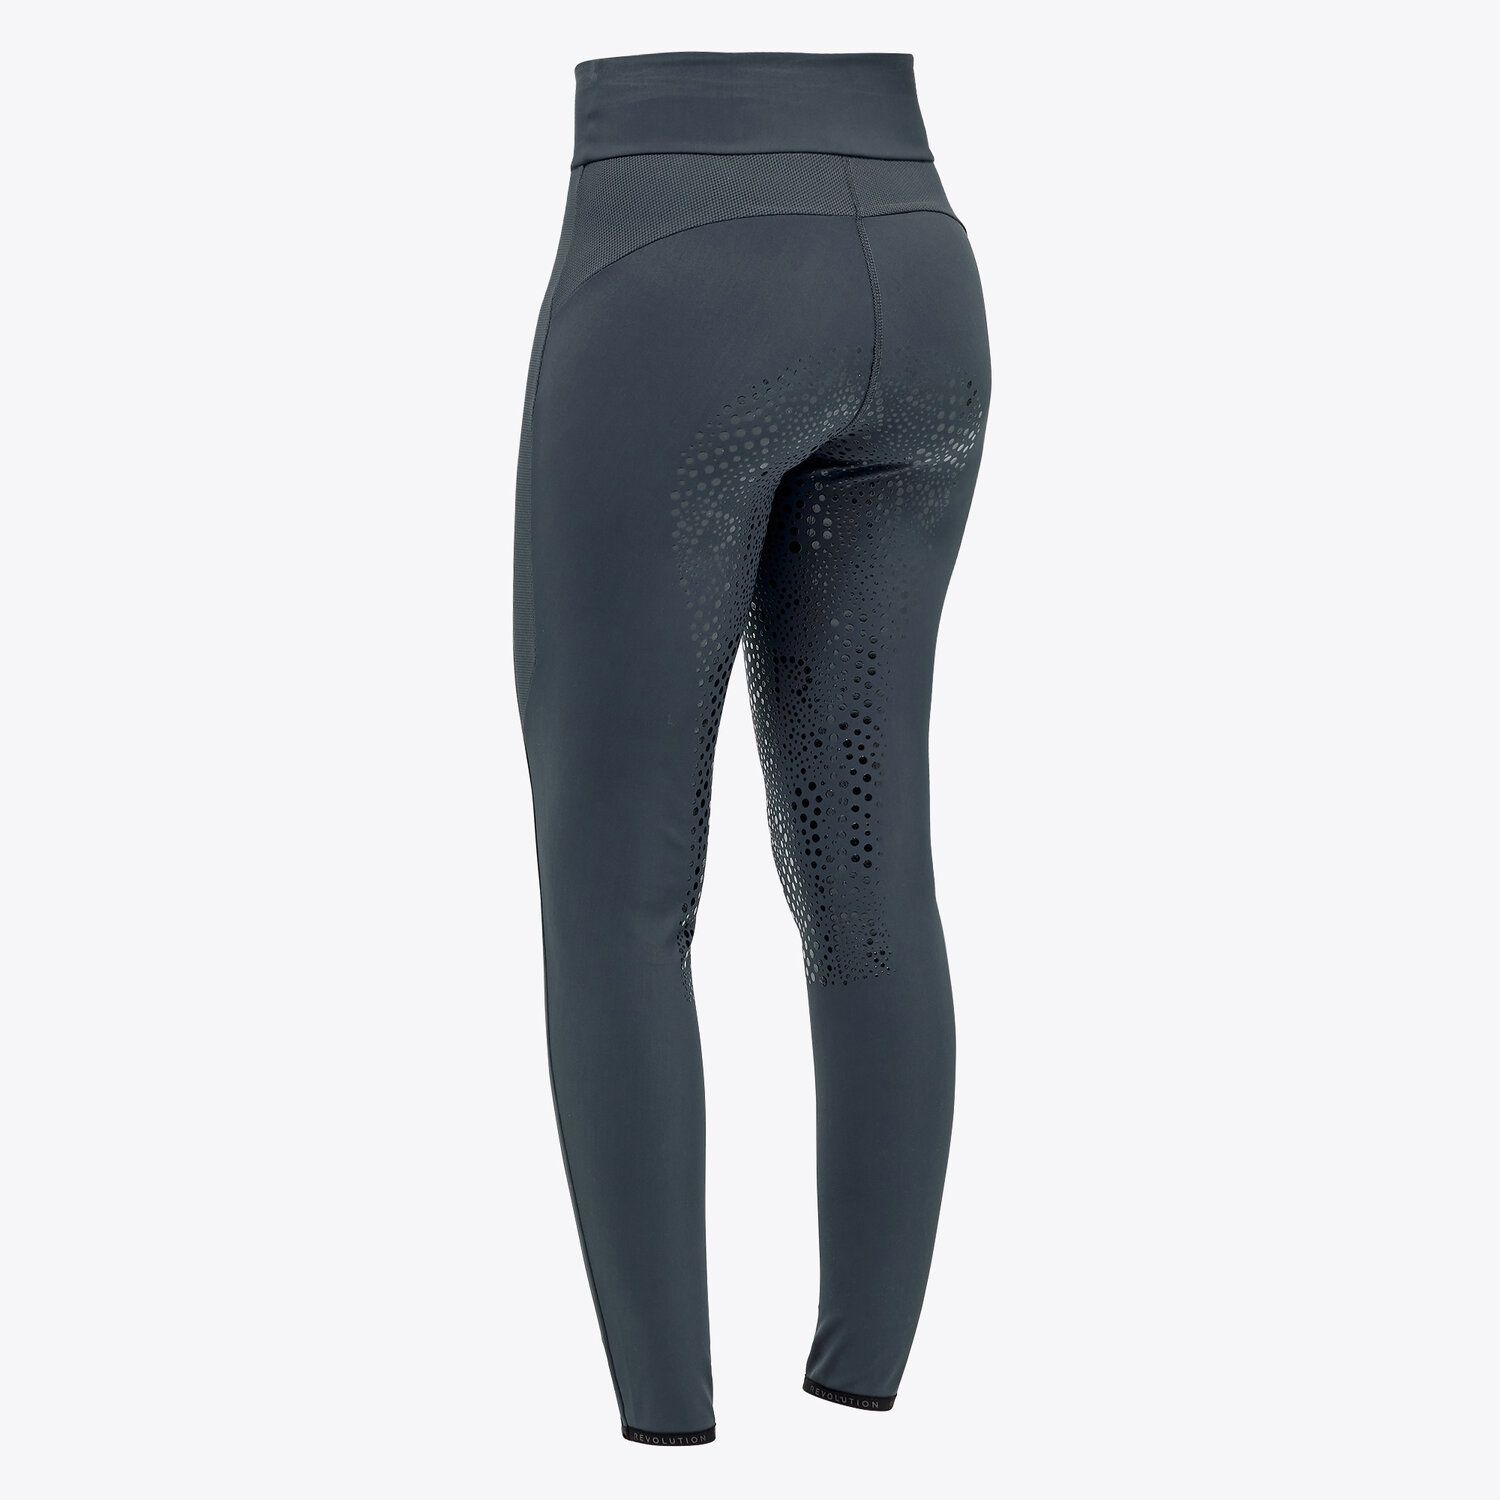 Cavalleria Toscana Women’s breeches with silicone grip CHARCOAL GREY-3